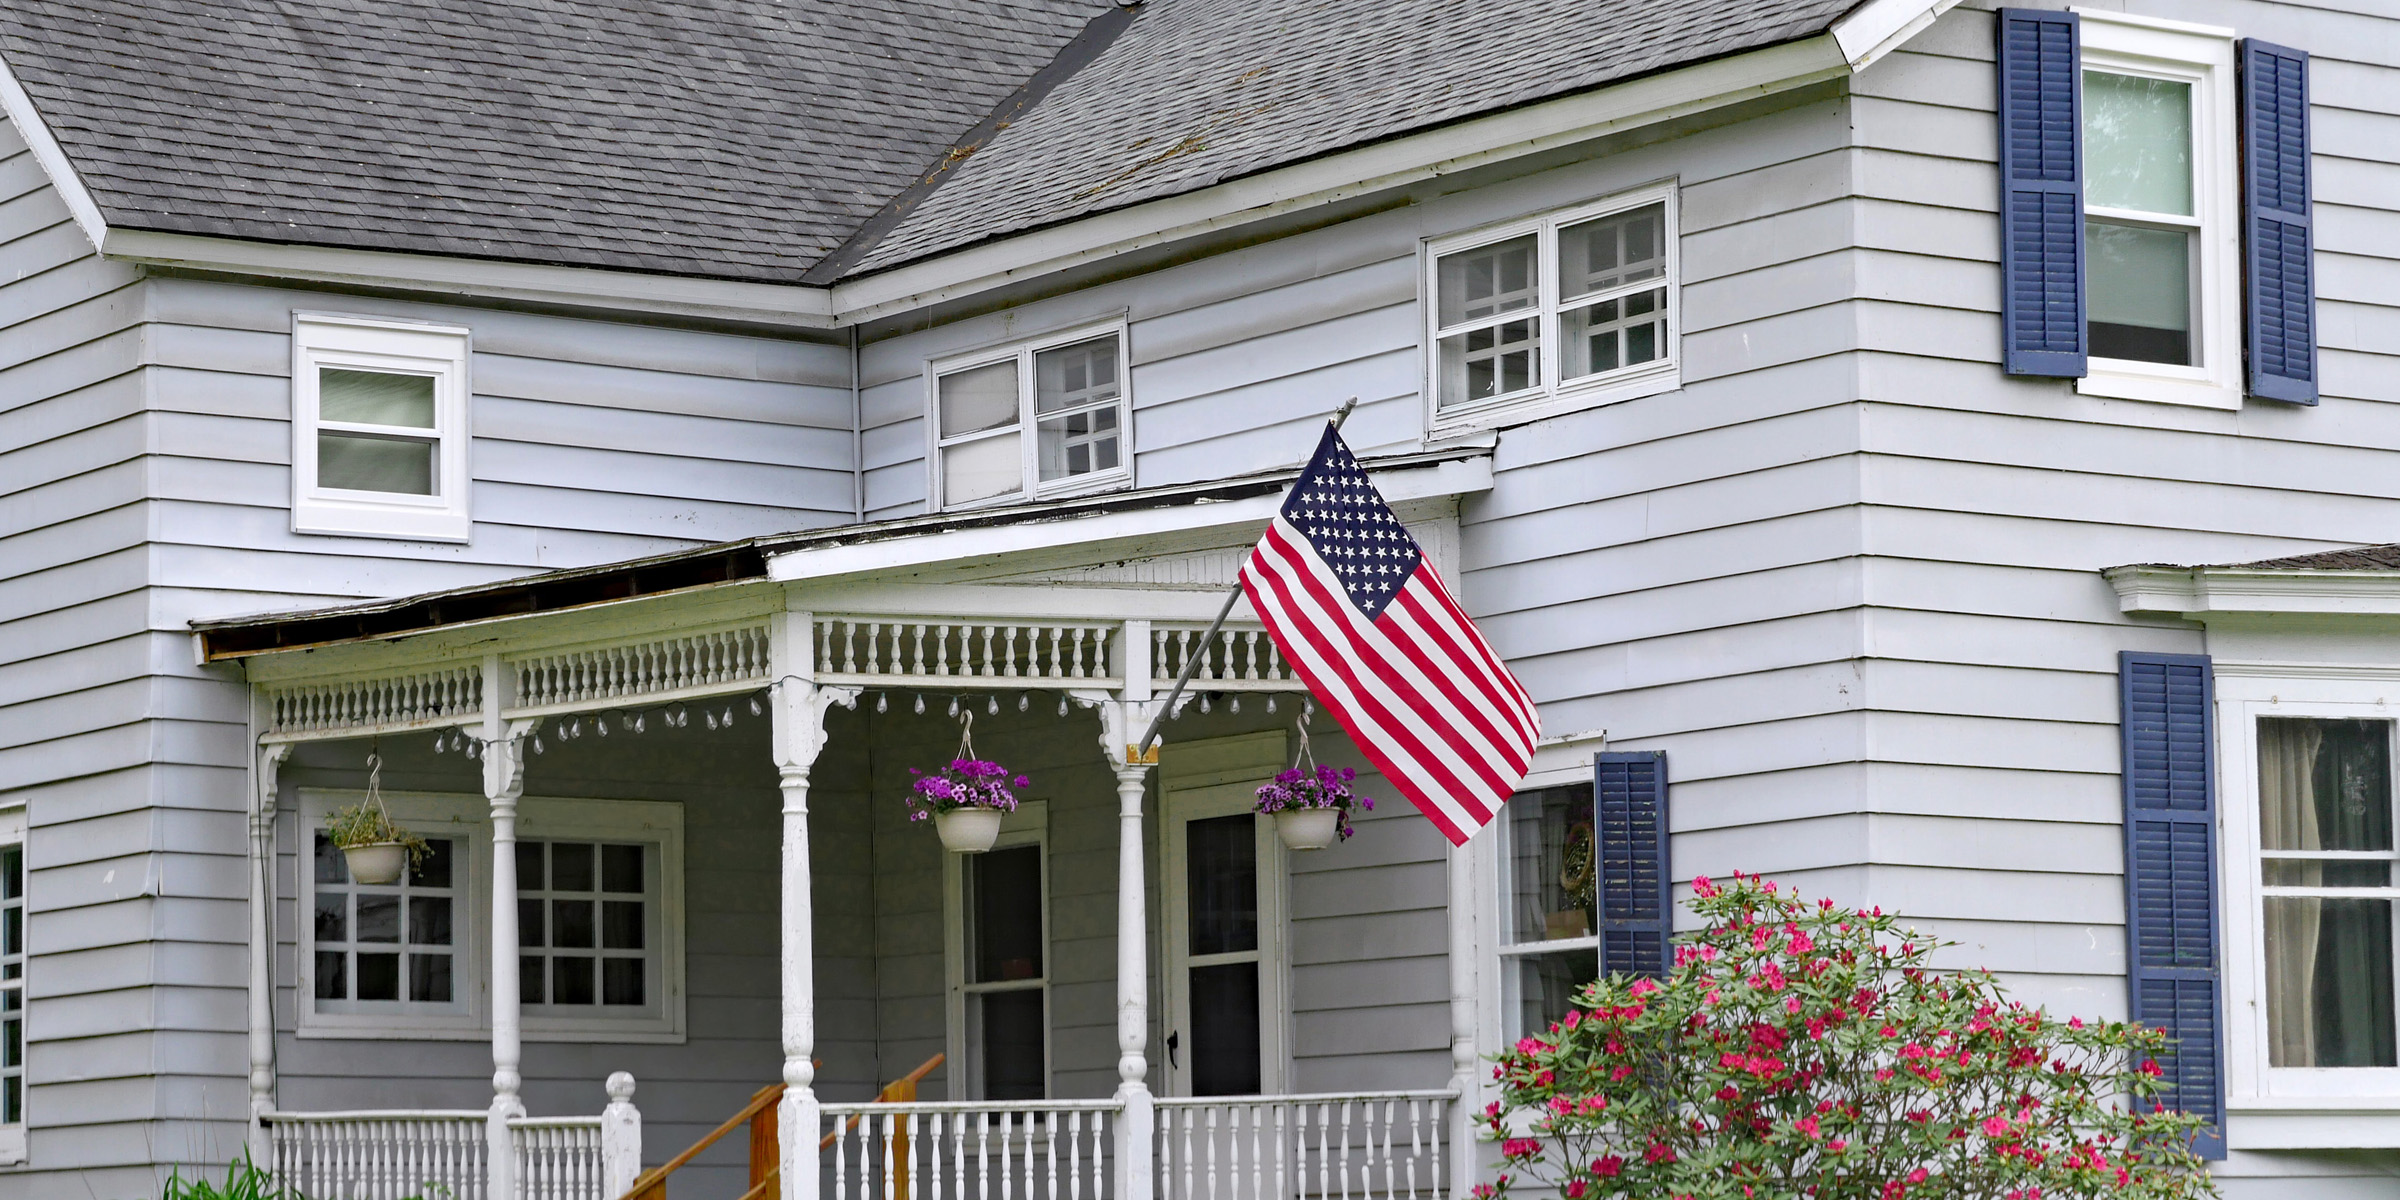 traditional style clapboard house with large porch and american flag